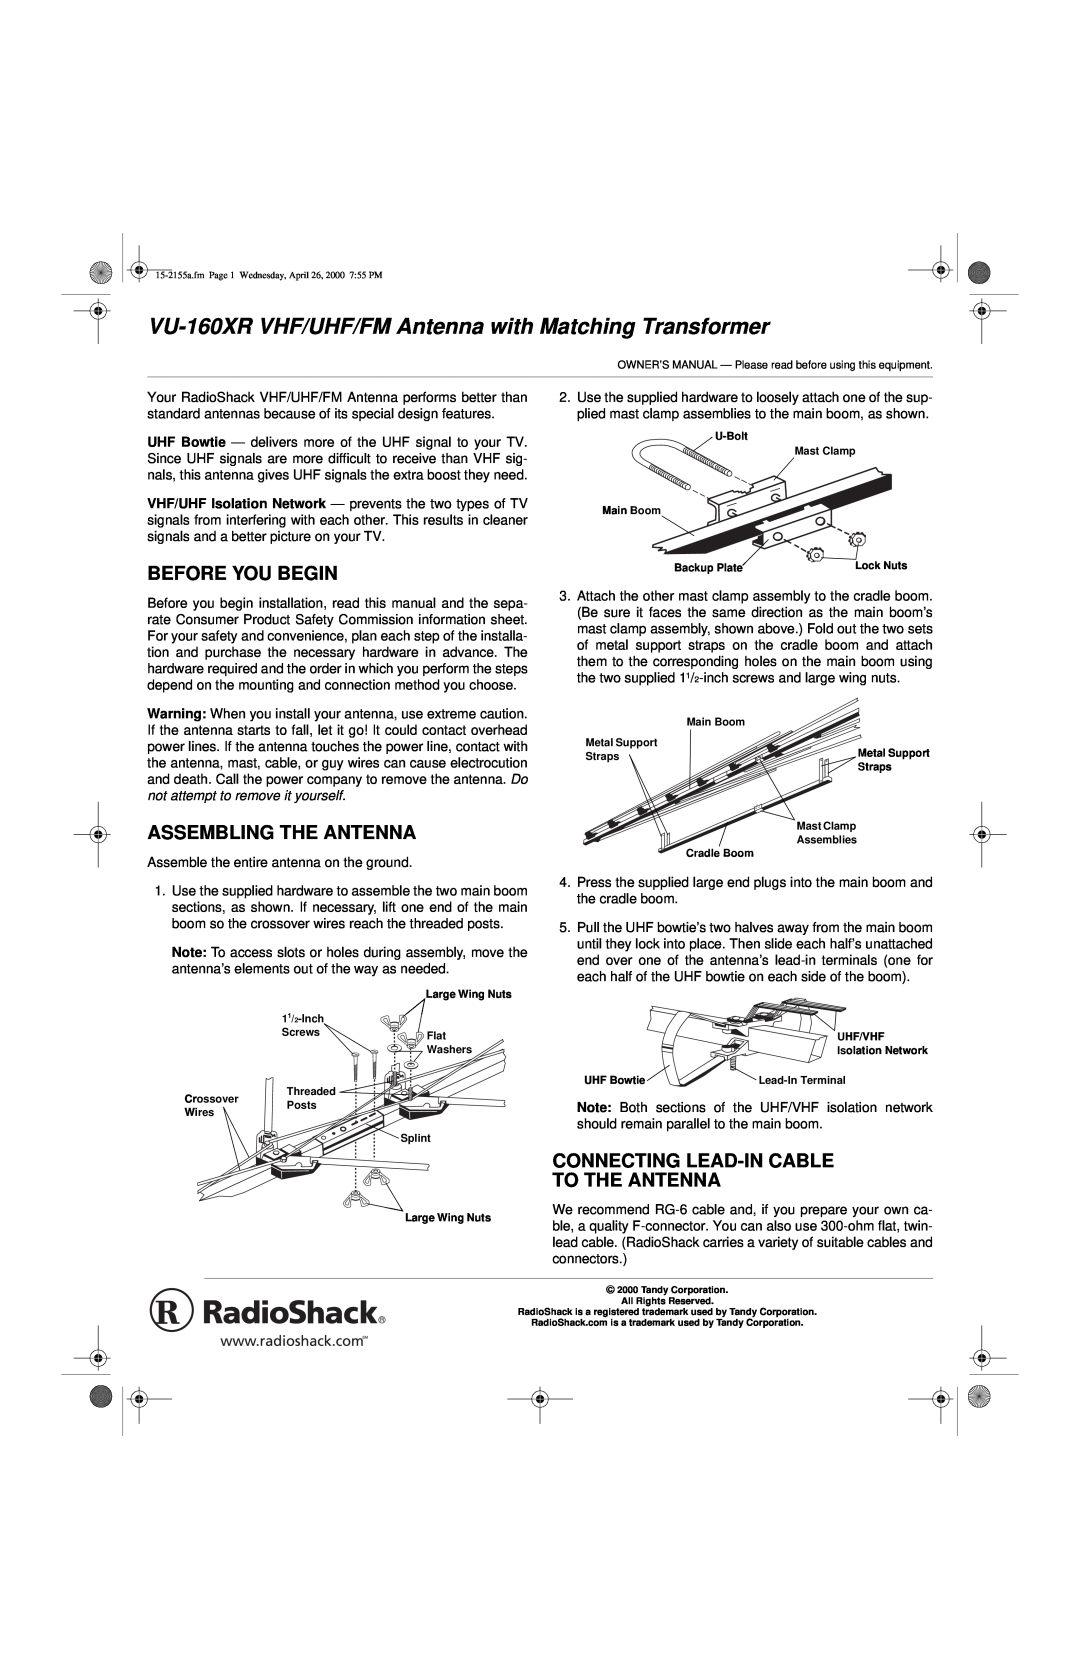 Radio Shack VU-160XR owner manual Before You Begin, Assembling The Antenna, Connecting Lead-In Cable To The Antenna 